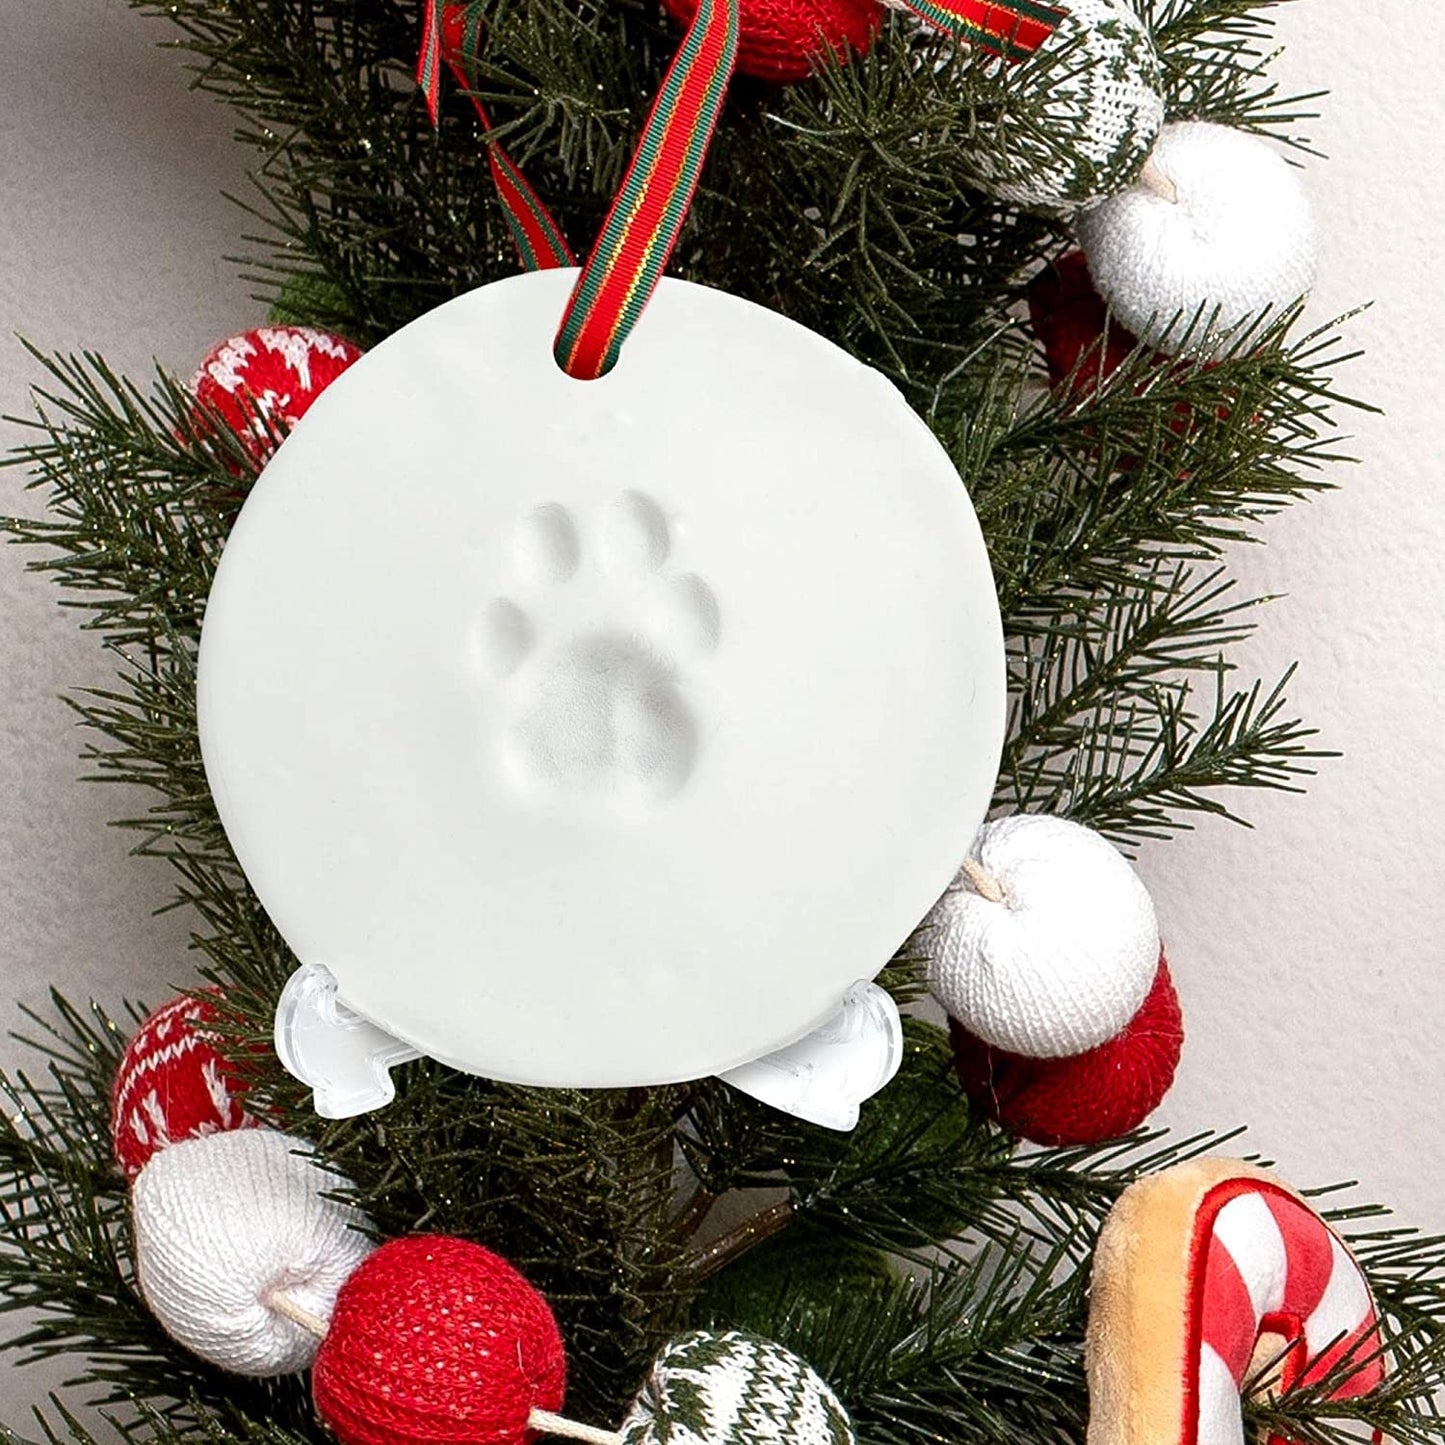 Midlee Christmas Dog Clay Paw Print Ornament Kit with Stand (2 Pack)